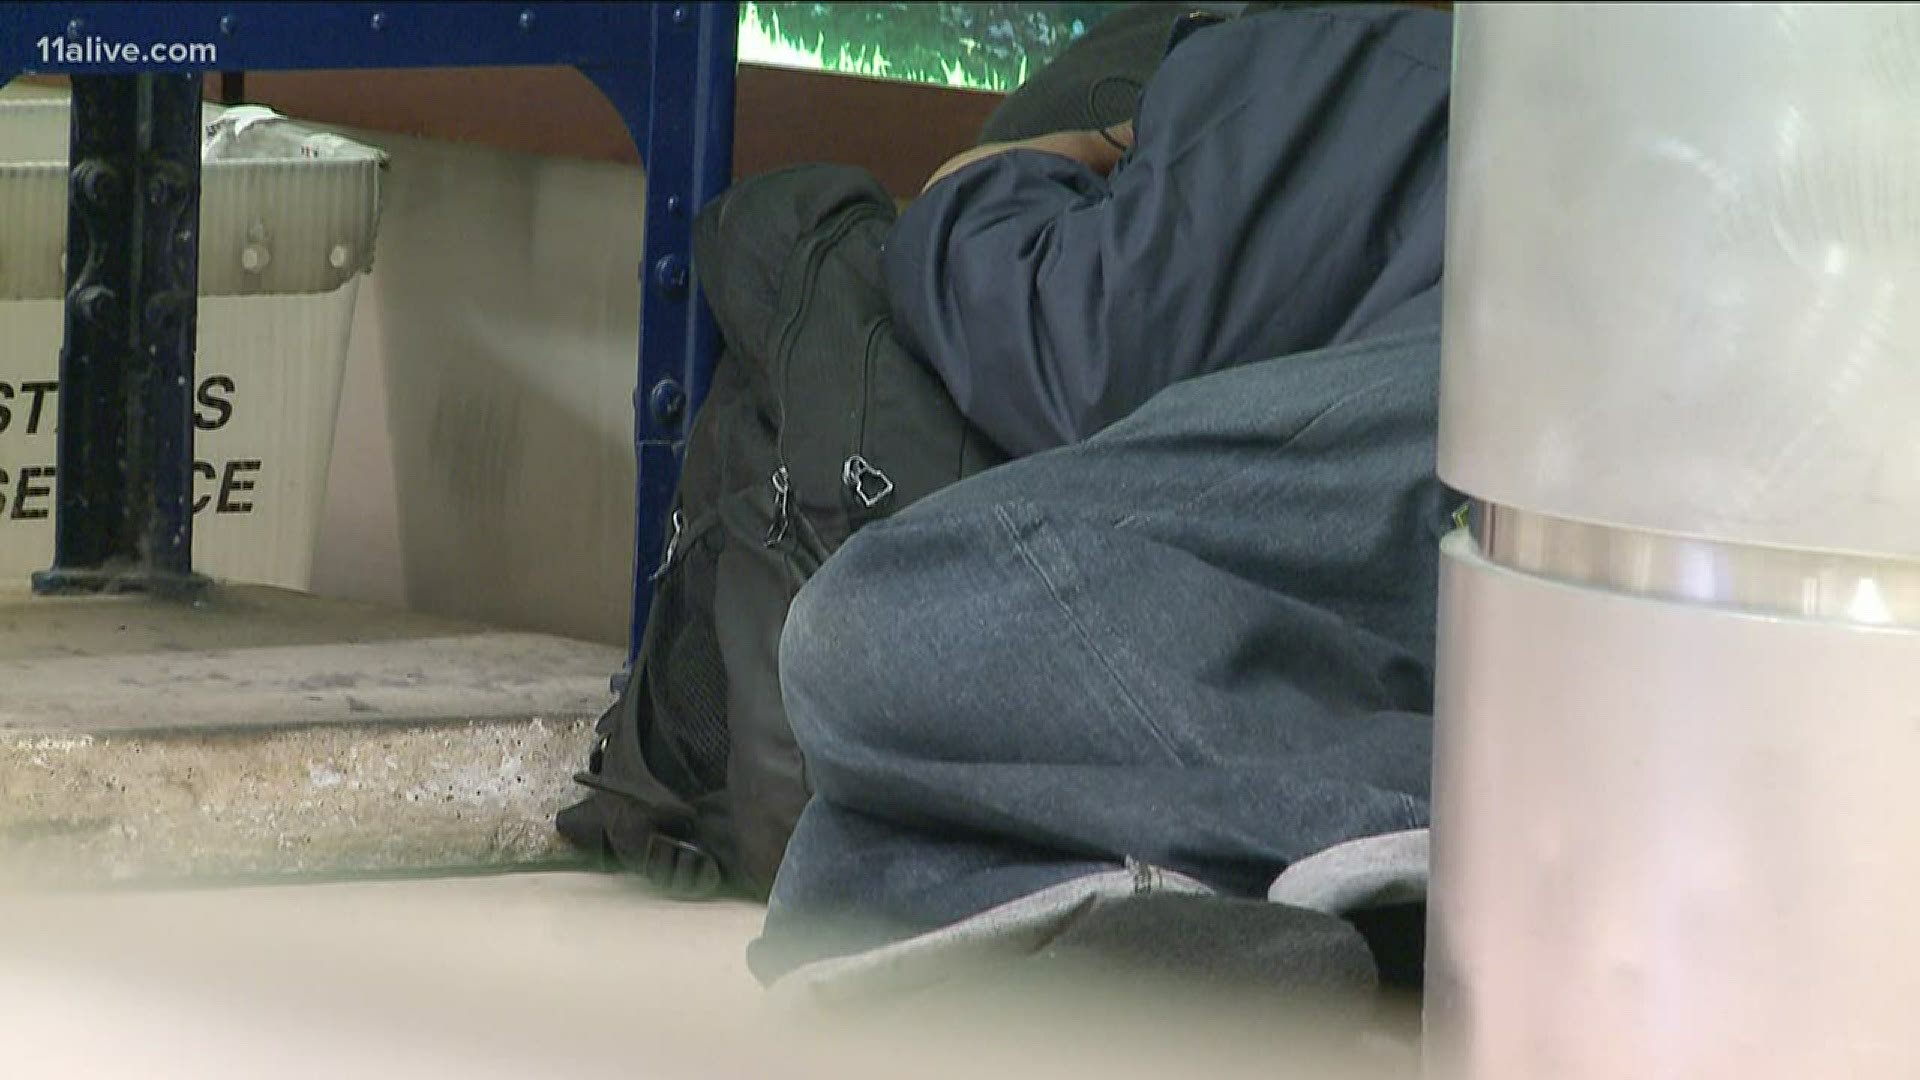 Nearly two million dollars will be used to provide additional shelter across the city.